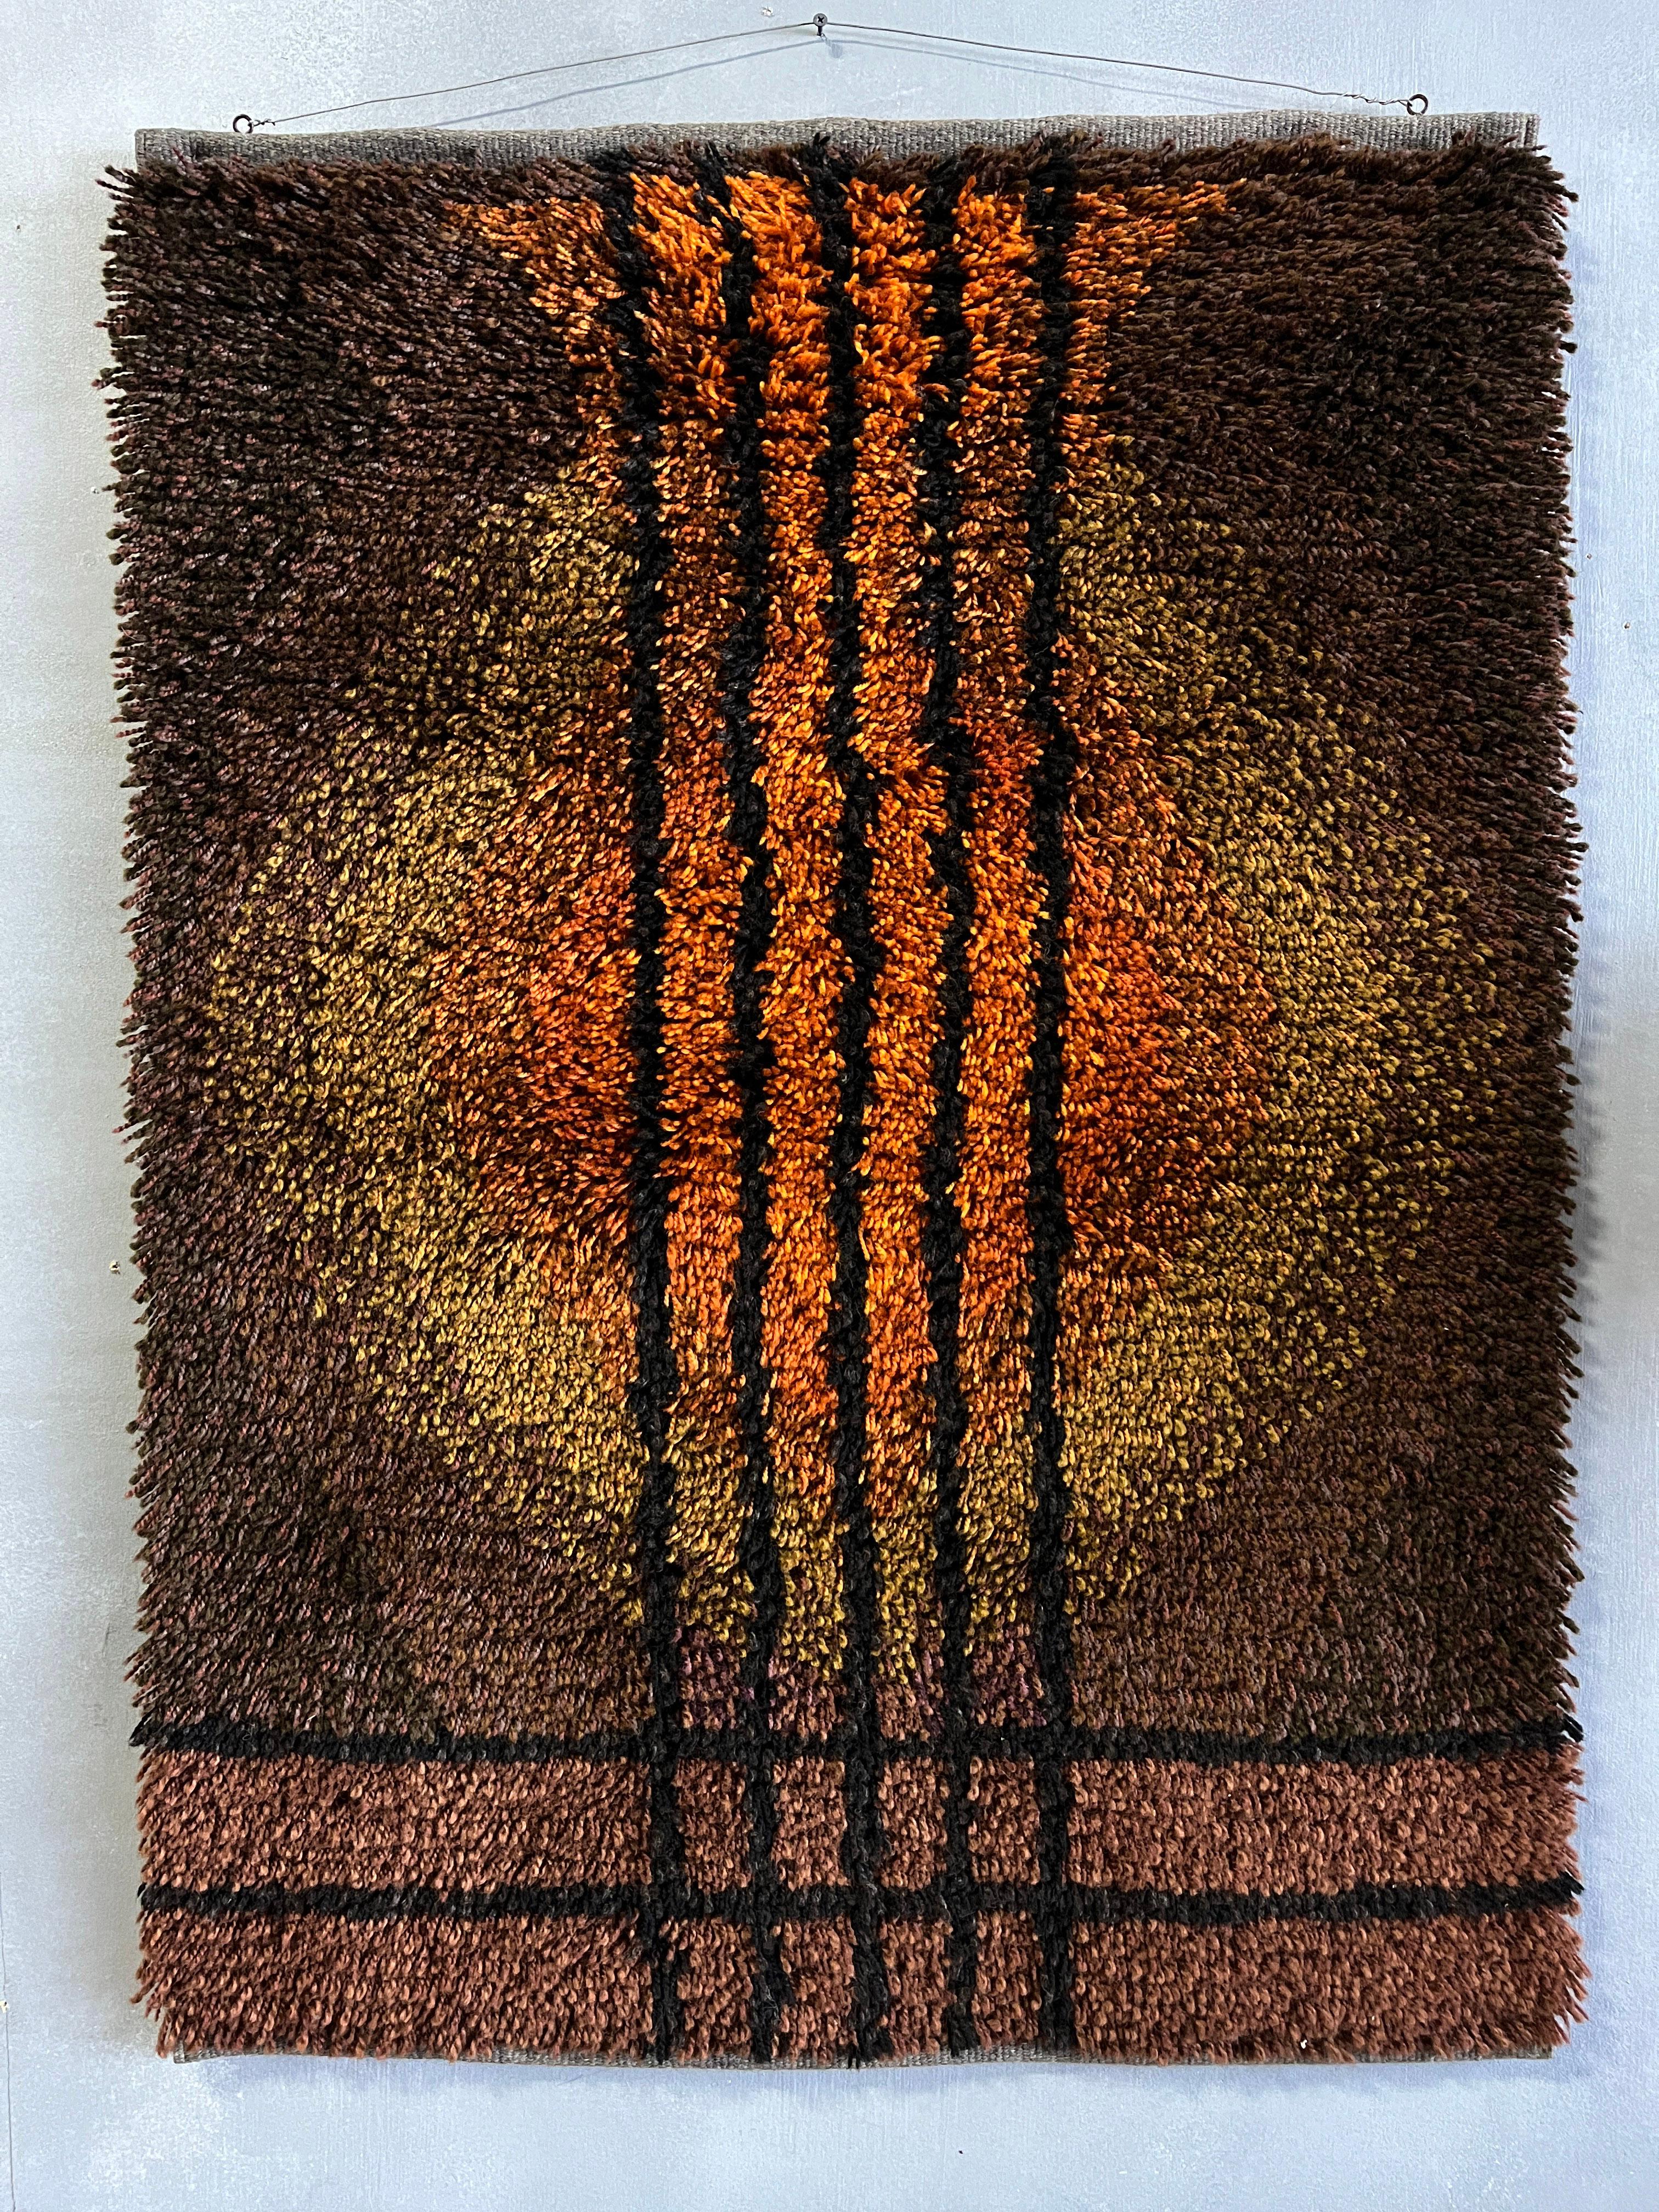 Striking Rya made with a high-quality handmade Rya weaving technique. To be used as a floor rug or a decorative wall hanging. In perfect condition, ready to hang. Sweden, circa 1960.